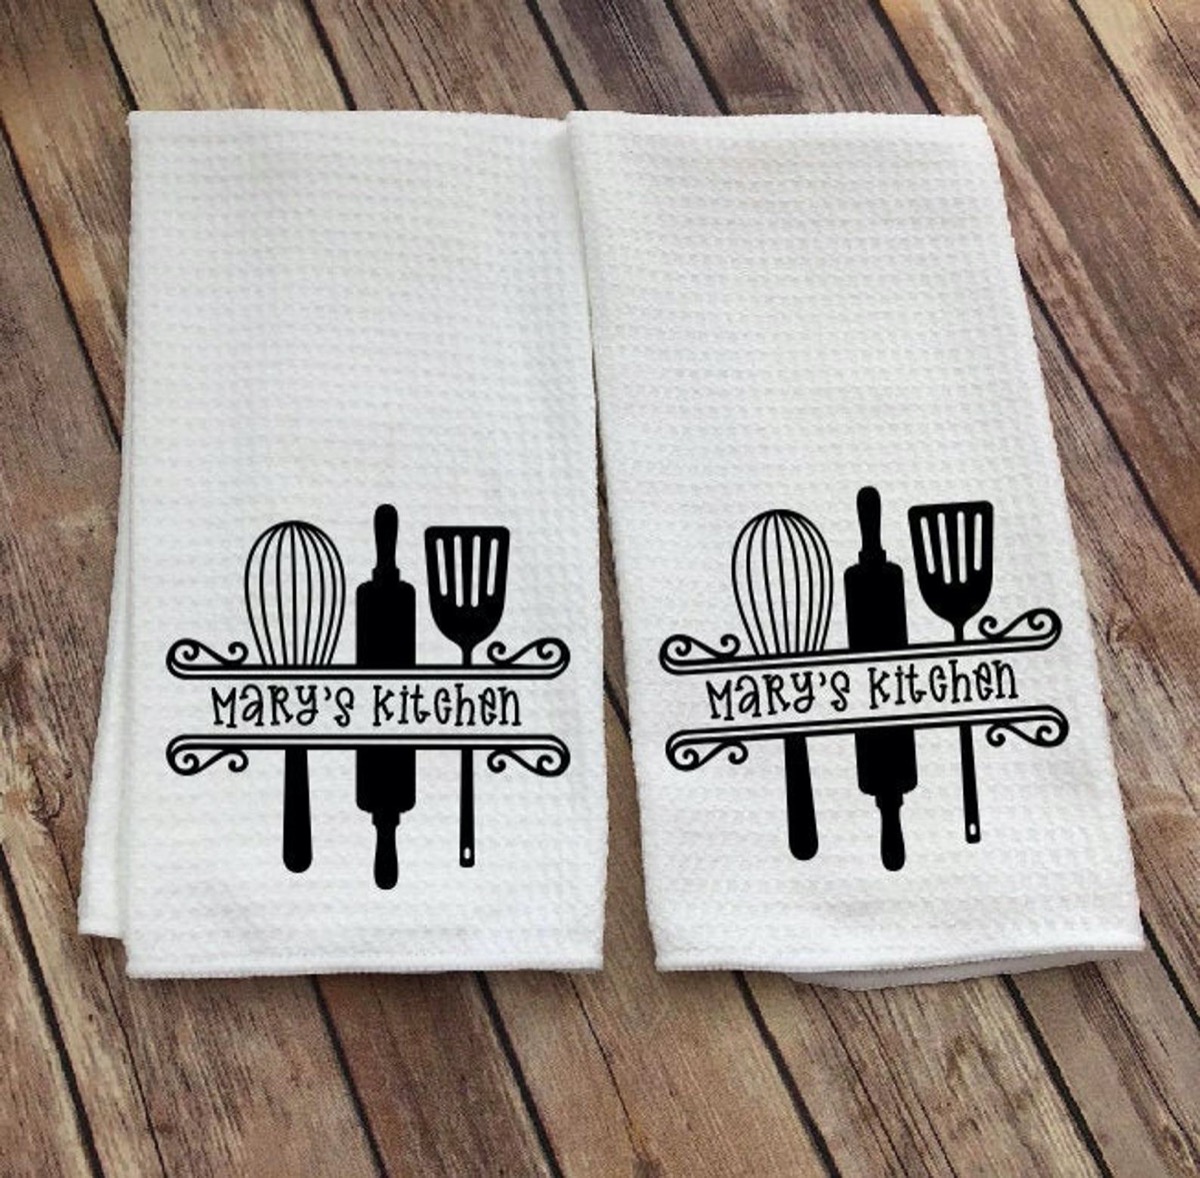 white personalized dish towels on wood background